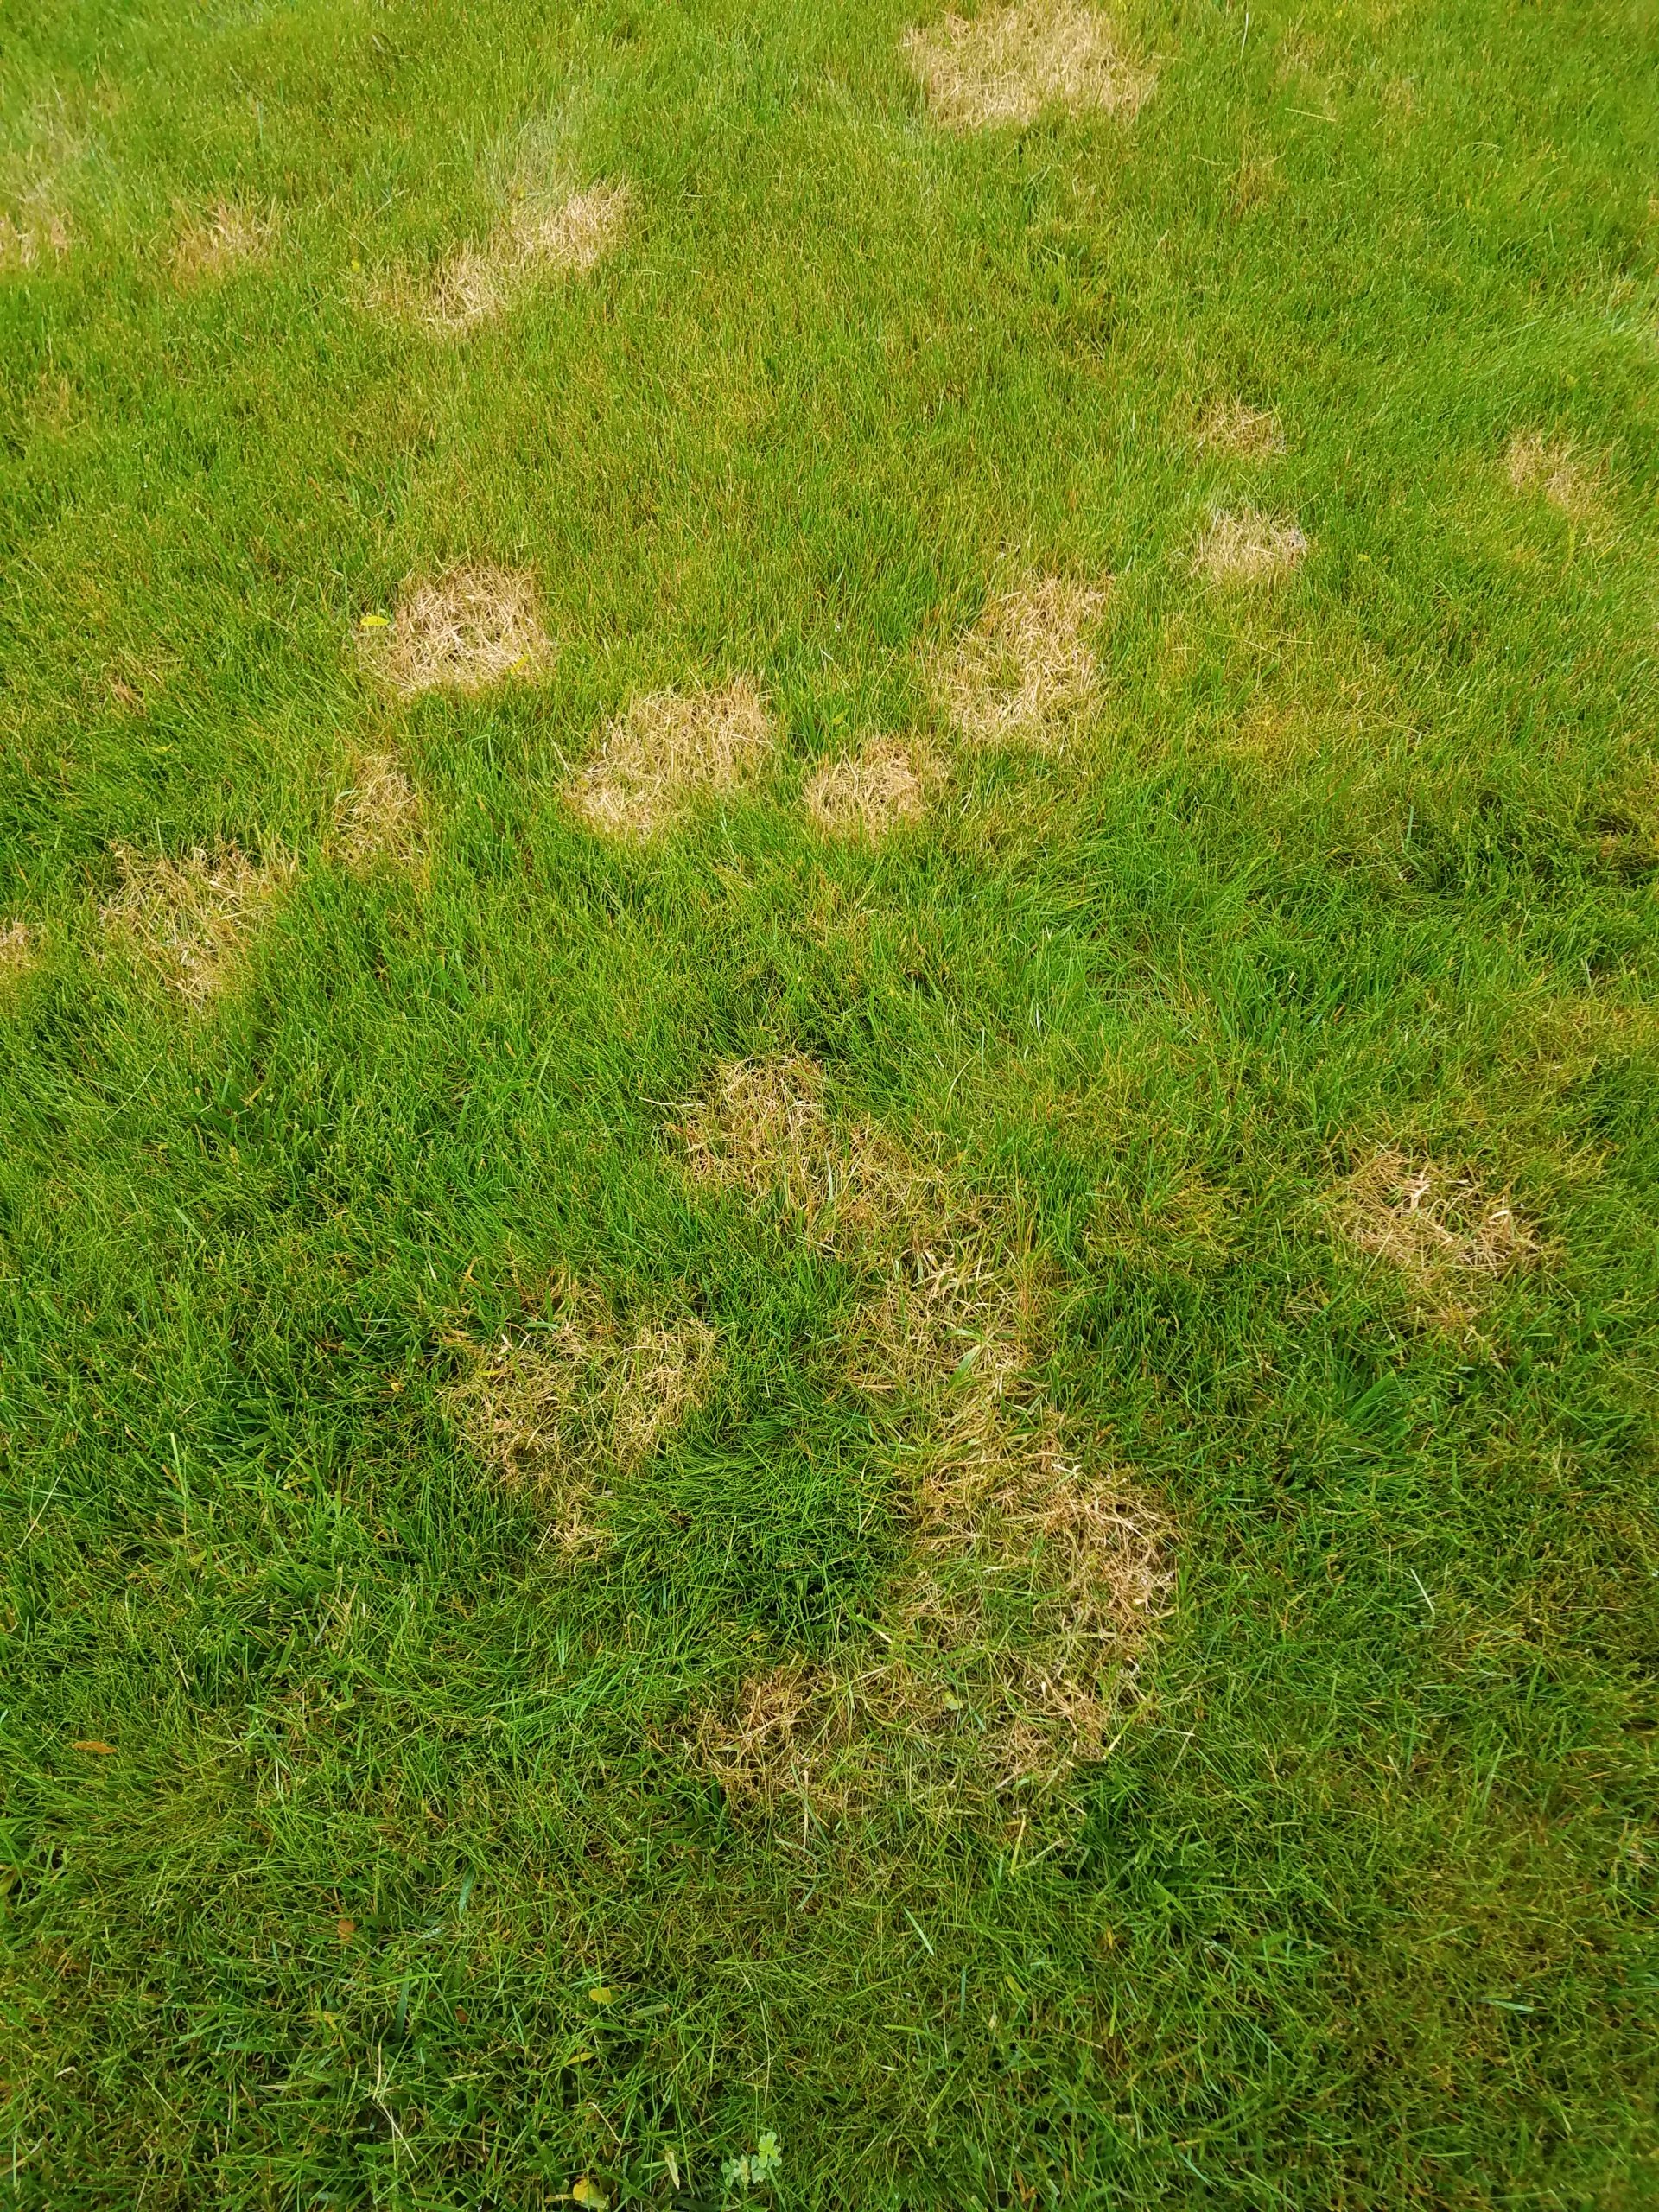 Image of Patch of brown grass in a sunny field